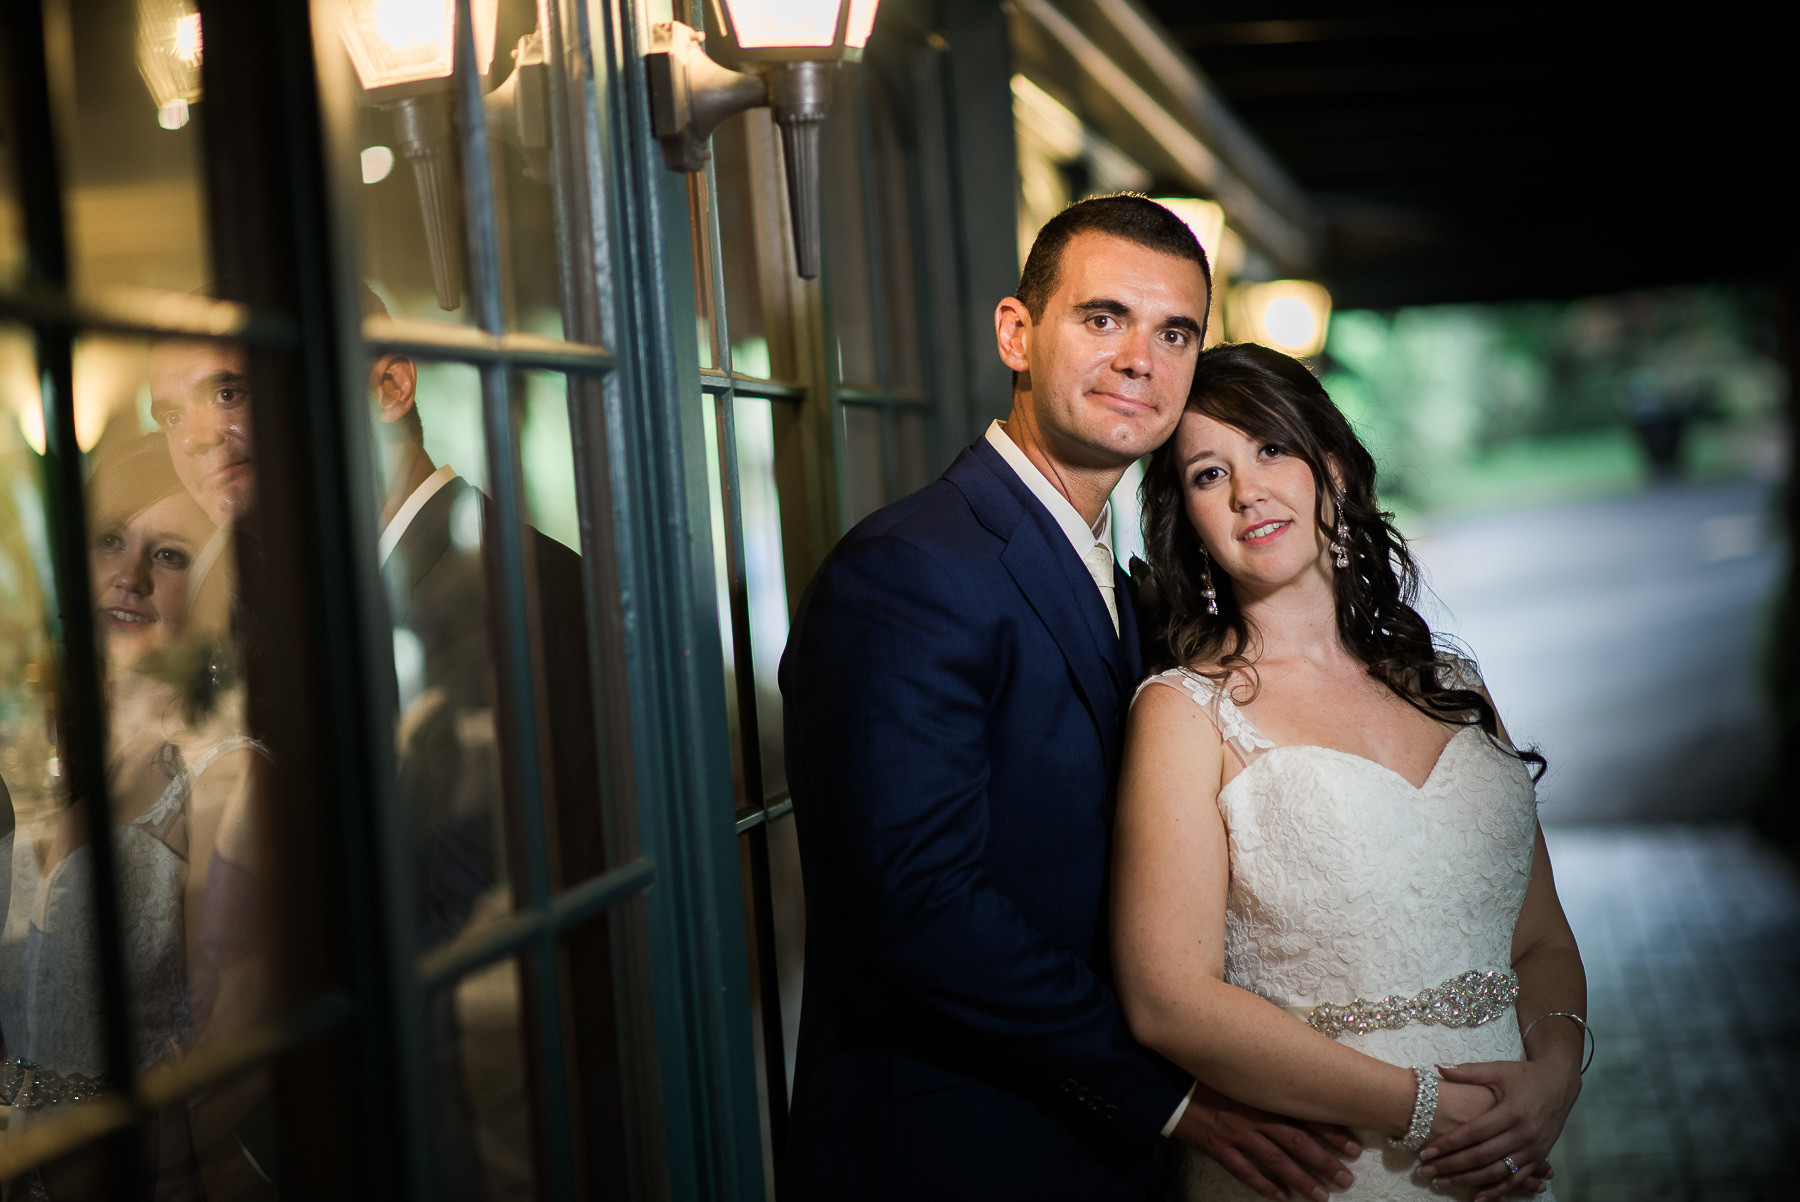 sylvia-nick-wedding-at-nathania-springs-andrew-is-passion8-photo-video